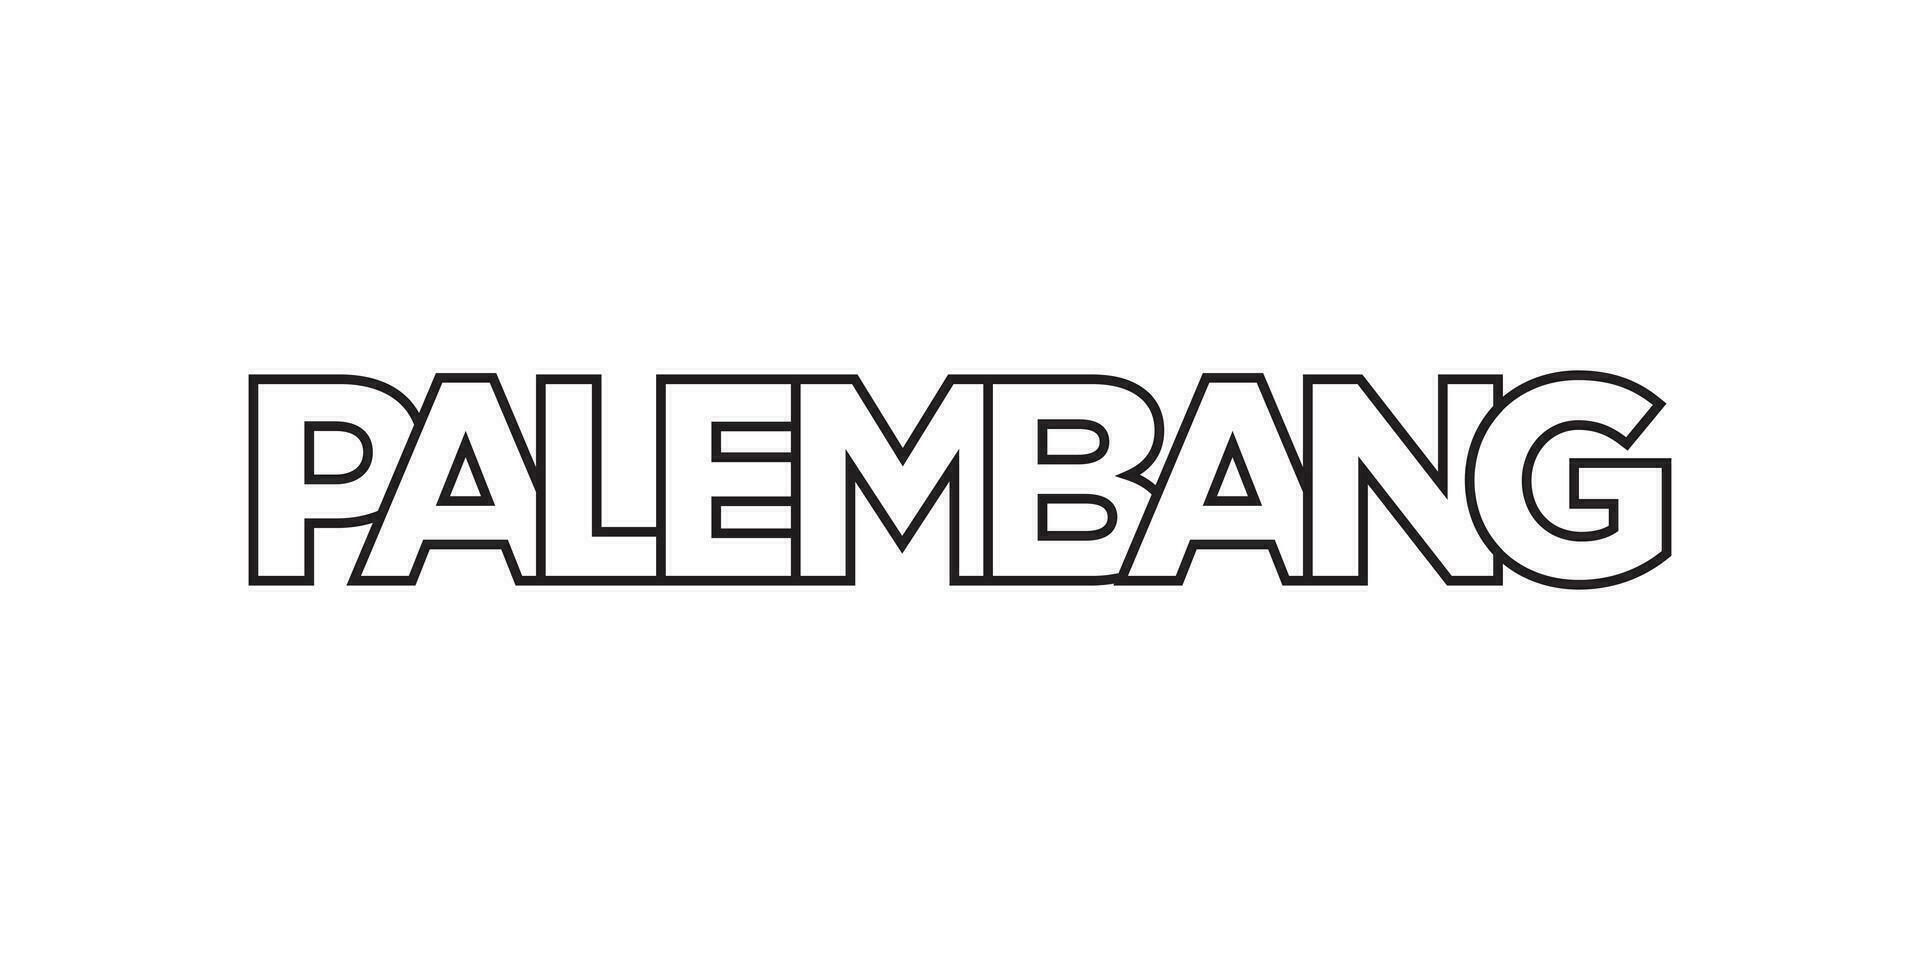 Palembang in the Indonesia emblem. The design features a geometric style, vector illustration with bold typography in a modern font. The graphic slogan lettering.